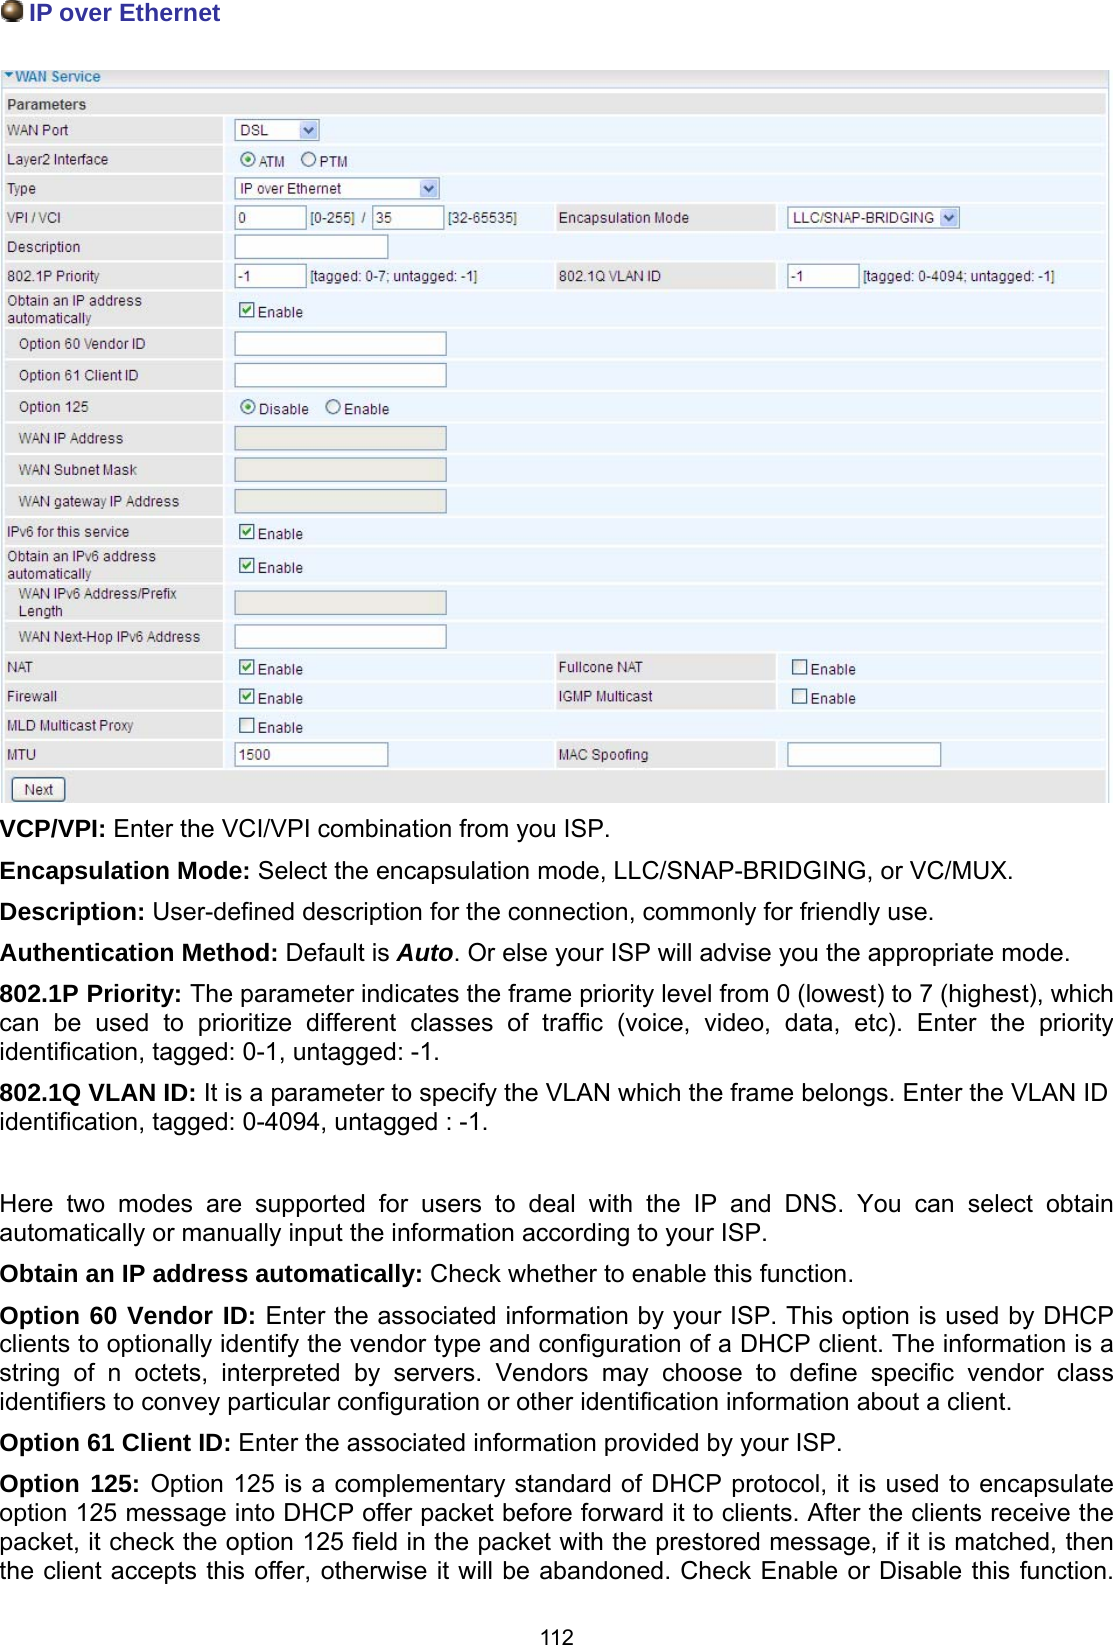  112  IP over Ethernet   VCP/VPI: Enter the VCI/VPI combination from you ISP.  Encapsulation Mode: Select the encapsulation mode, LLC/SNAP-BRIDGING, or VC/MUX. Description: User-defined description for the connection, commonly for friendly use. Authentication Method: Default is Auto. Or else your ISP will advise you the appropriate mode. 802.1P Priority: The parameter indicates the frame priority level from 0 (lowest) to 7 (highest), which can be used to prioritize different classes of traffic (voice, video, data, etc). Enter the priority identification, tagged: 0-1, untagged: -1. 802.1Q VLAN ID: It is a parameter to specify the VLAN which the frame belongs. Enter the VLAN ID identification, tagged: 0-4094, untagged : -1.  Here two modes are supported for users to deal with the IP and DNS. You can select obtain automatically or manually input the information according to your ISP. Obtain an IP address automatically: Check whether to enable this function. Option 60 Vendor ID: Enter the associated information by your ISP. This option is used by DHCP clients to optionally identify the vendor type and configuration of a DHCP client. The information is a string of n octets, interpreted by servers. Vendors may choose to define specific vendor class identifiers to convey particular configuration or other identification information about a client. Option 61 Client ID: Enter the associated information provided by your ISP.  Option 125: Option 125 is a complementary standard of DHCP protocol, it is used to encapsulate option 125 message into DHCP offer packet before forward it to clients. After the clients receive the packet, it check the option 125 field in the packet with the prestored message, if it is matched, then the client accepts this offer, otherwise it will be abandoned. Check Enable or Disable this function. 